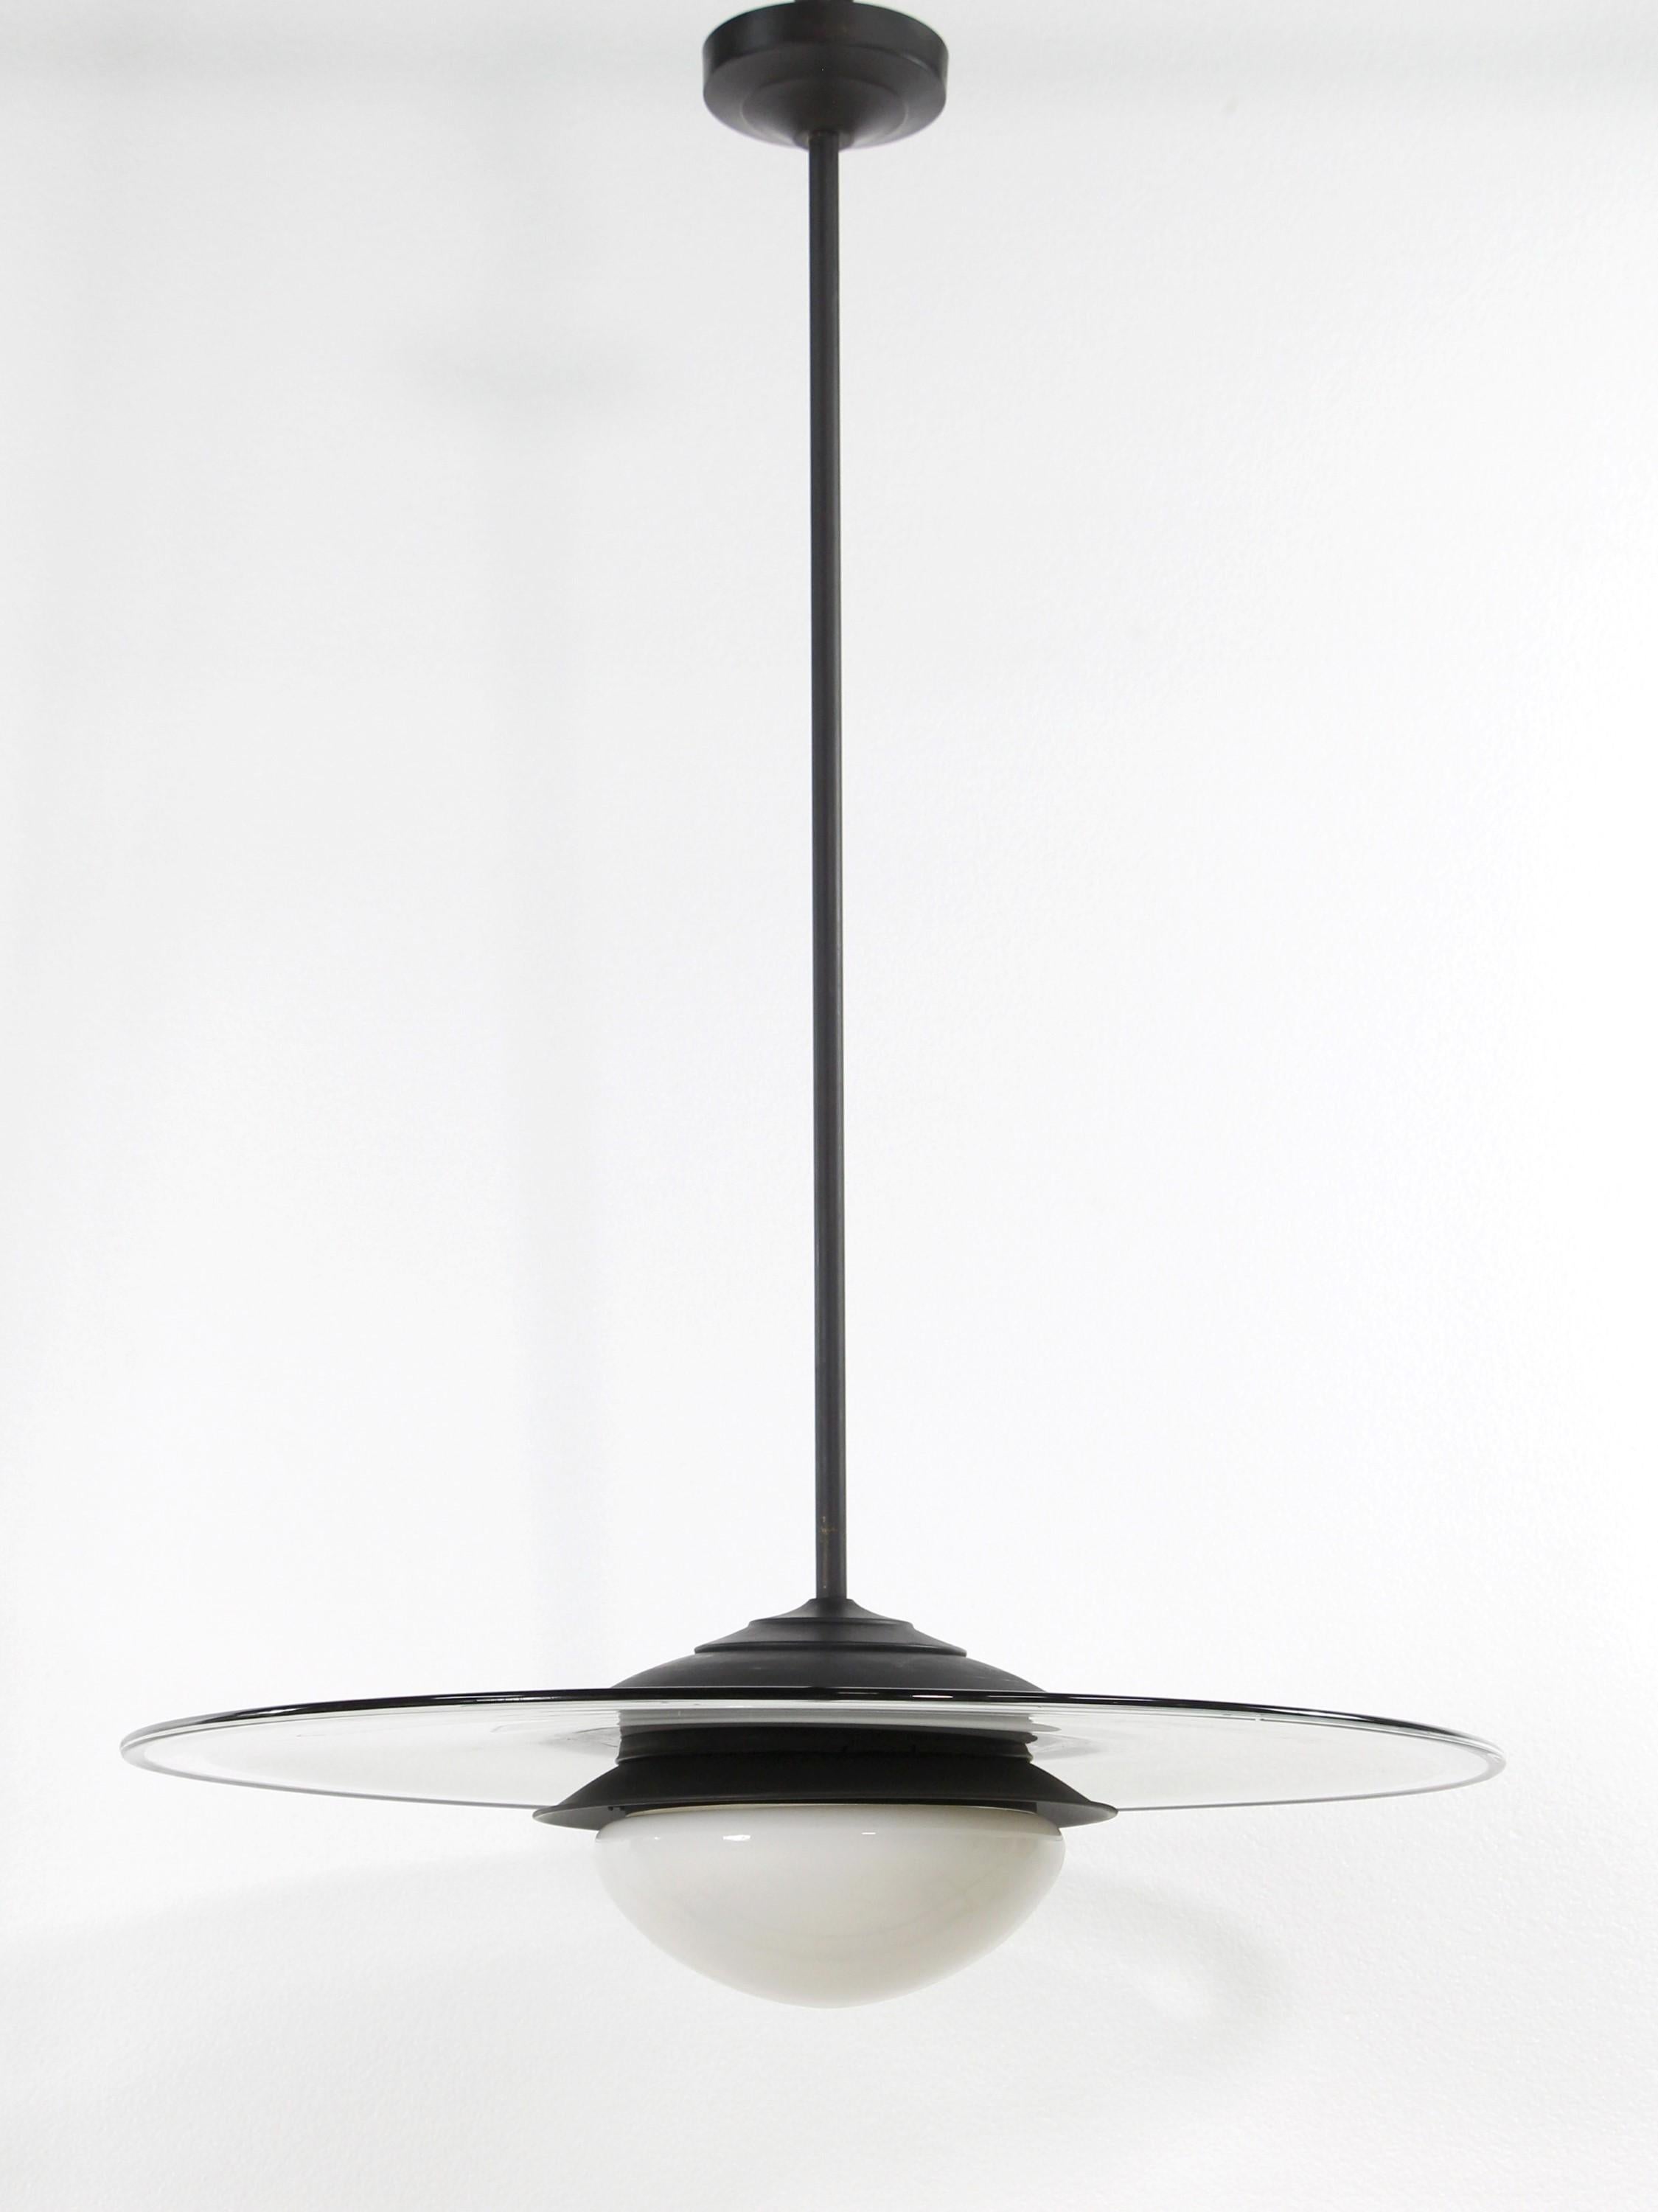 Vetri Murano Italian pendant light with white pancake shape glass with outer clear glass and a black rim.  Underneath is a white glass globe.  The hardware is newly wired and features a darkened long pole.  The price includes cleaning and wiring.